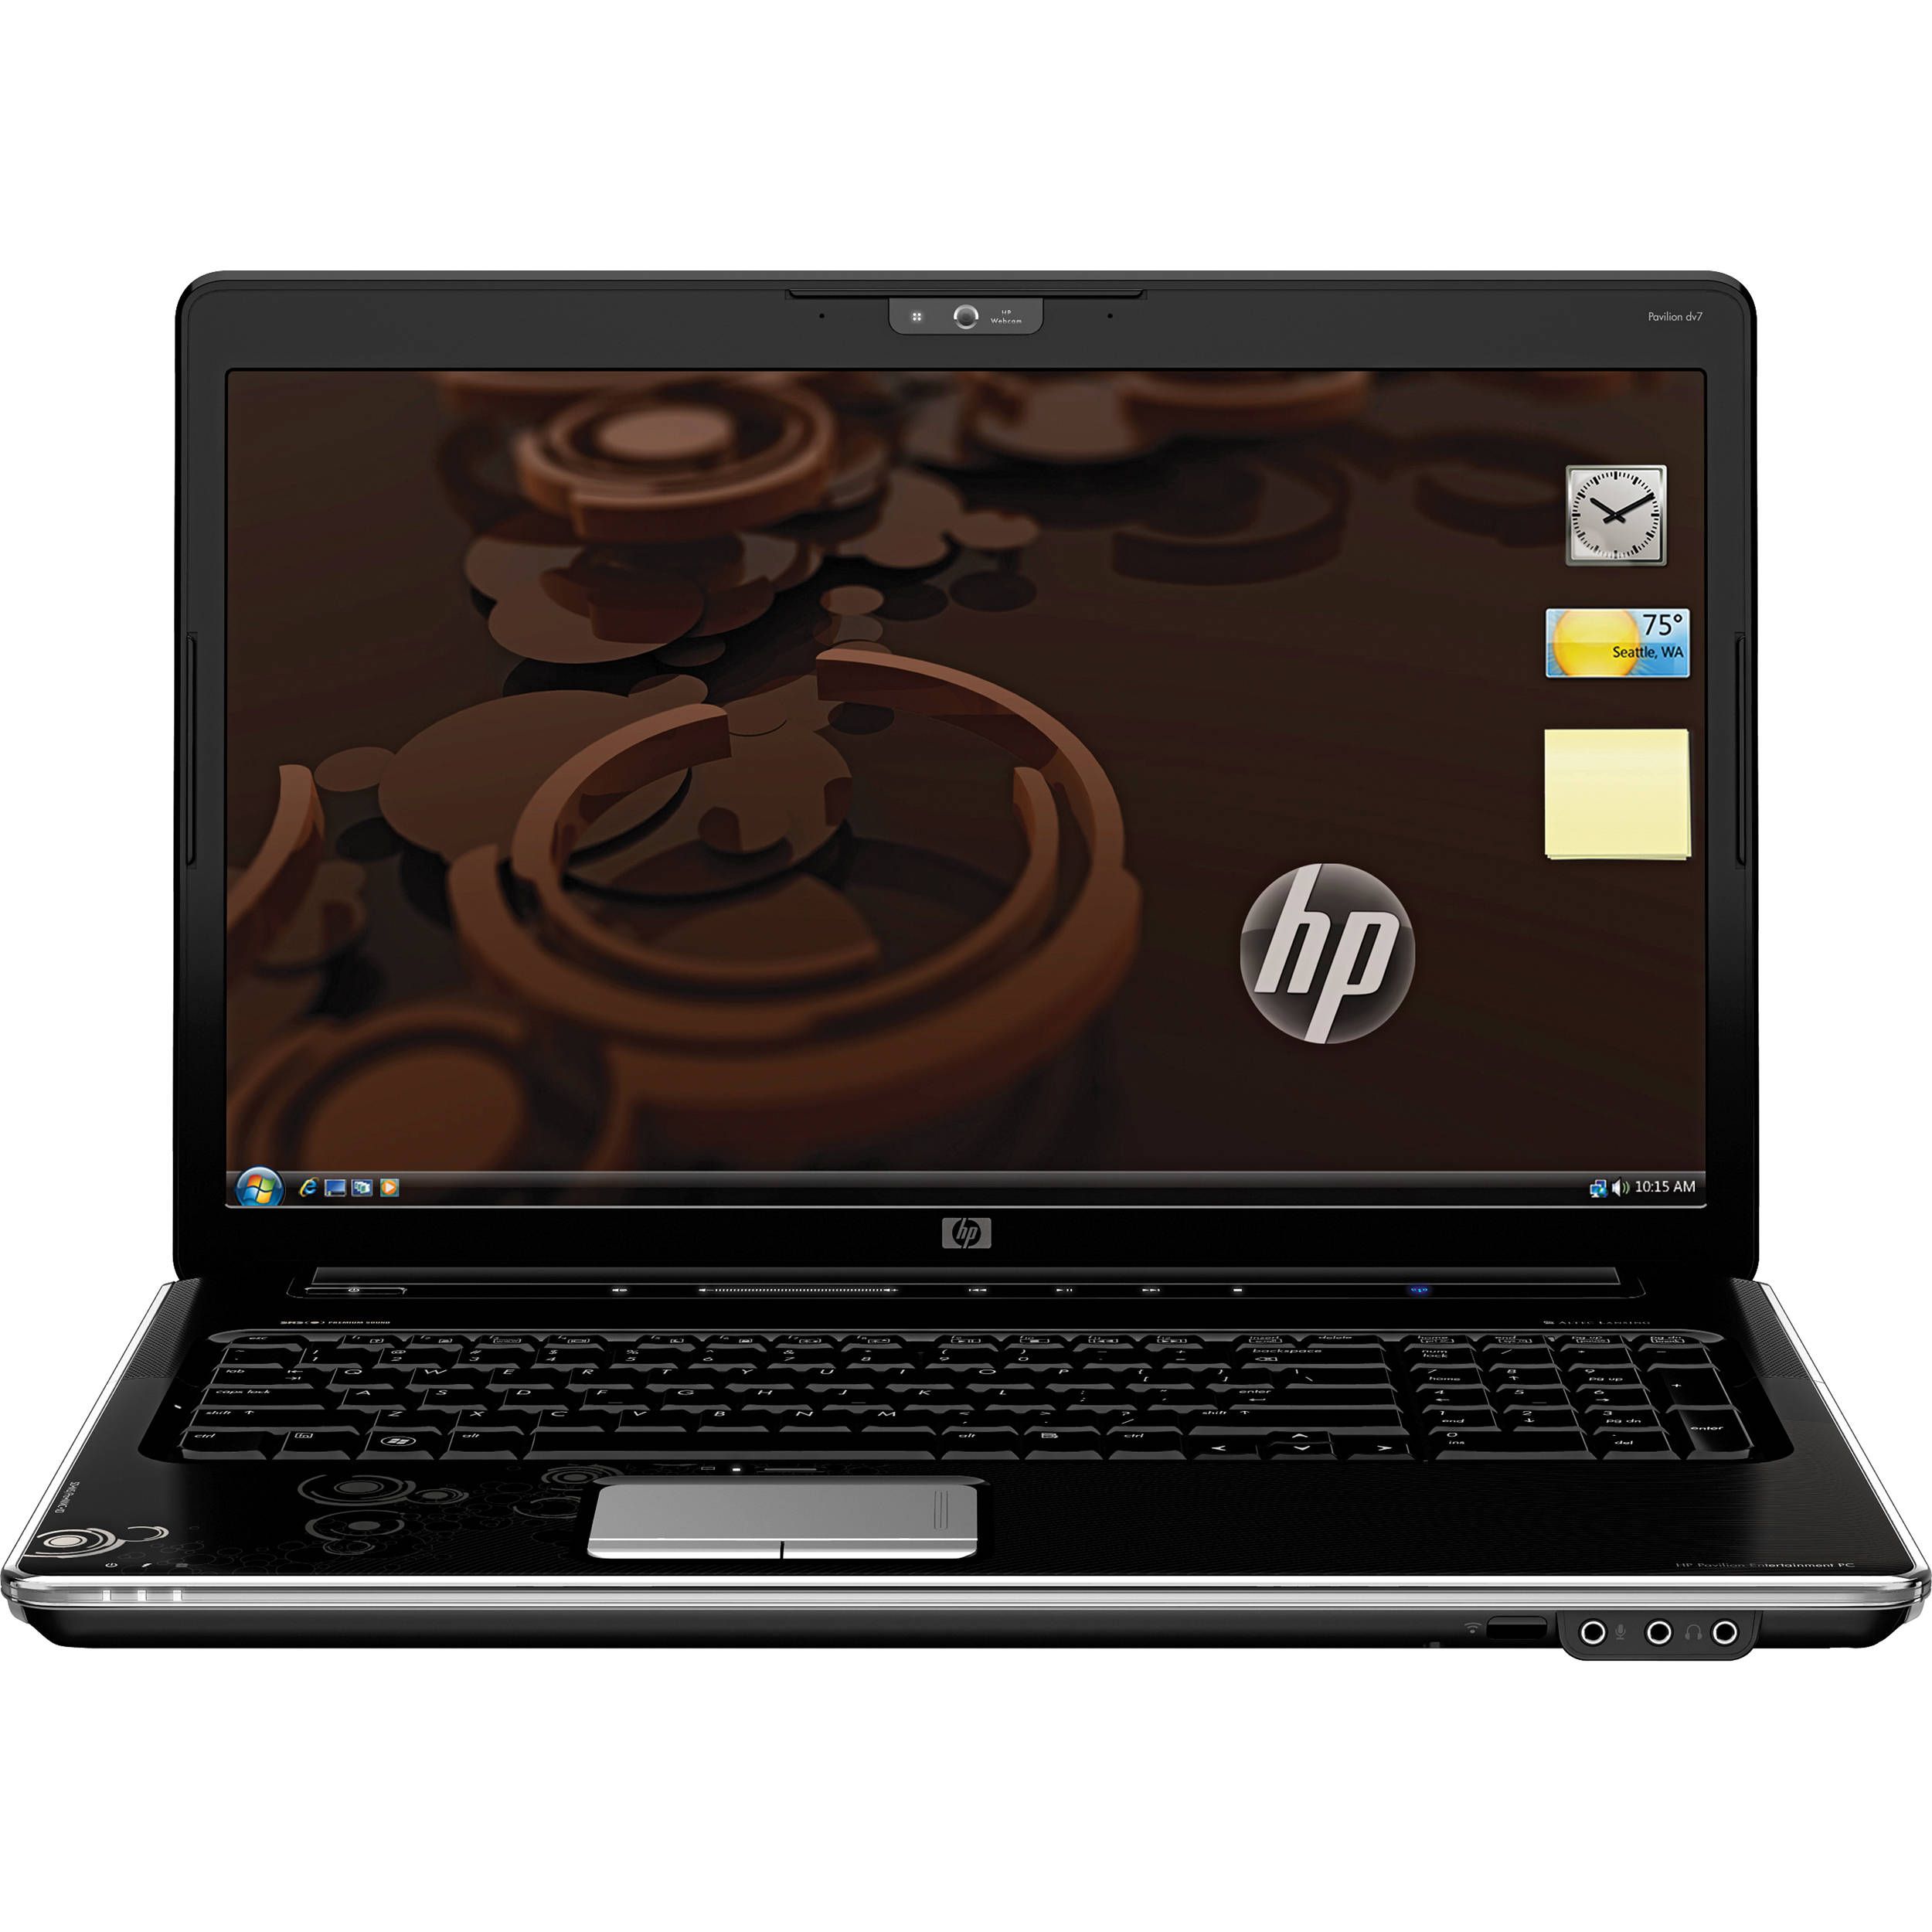 HP DV7-3160US Entertainment Laptop. Used but in excellent condition.